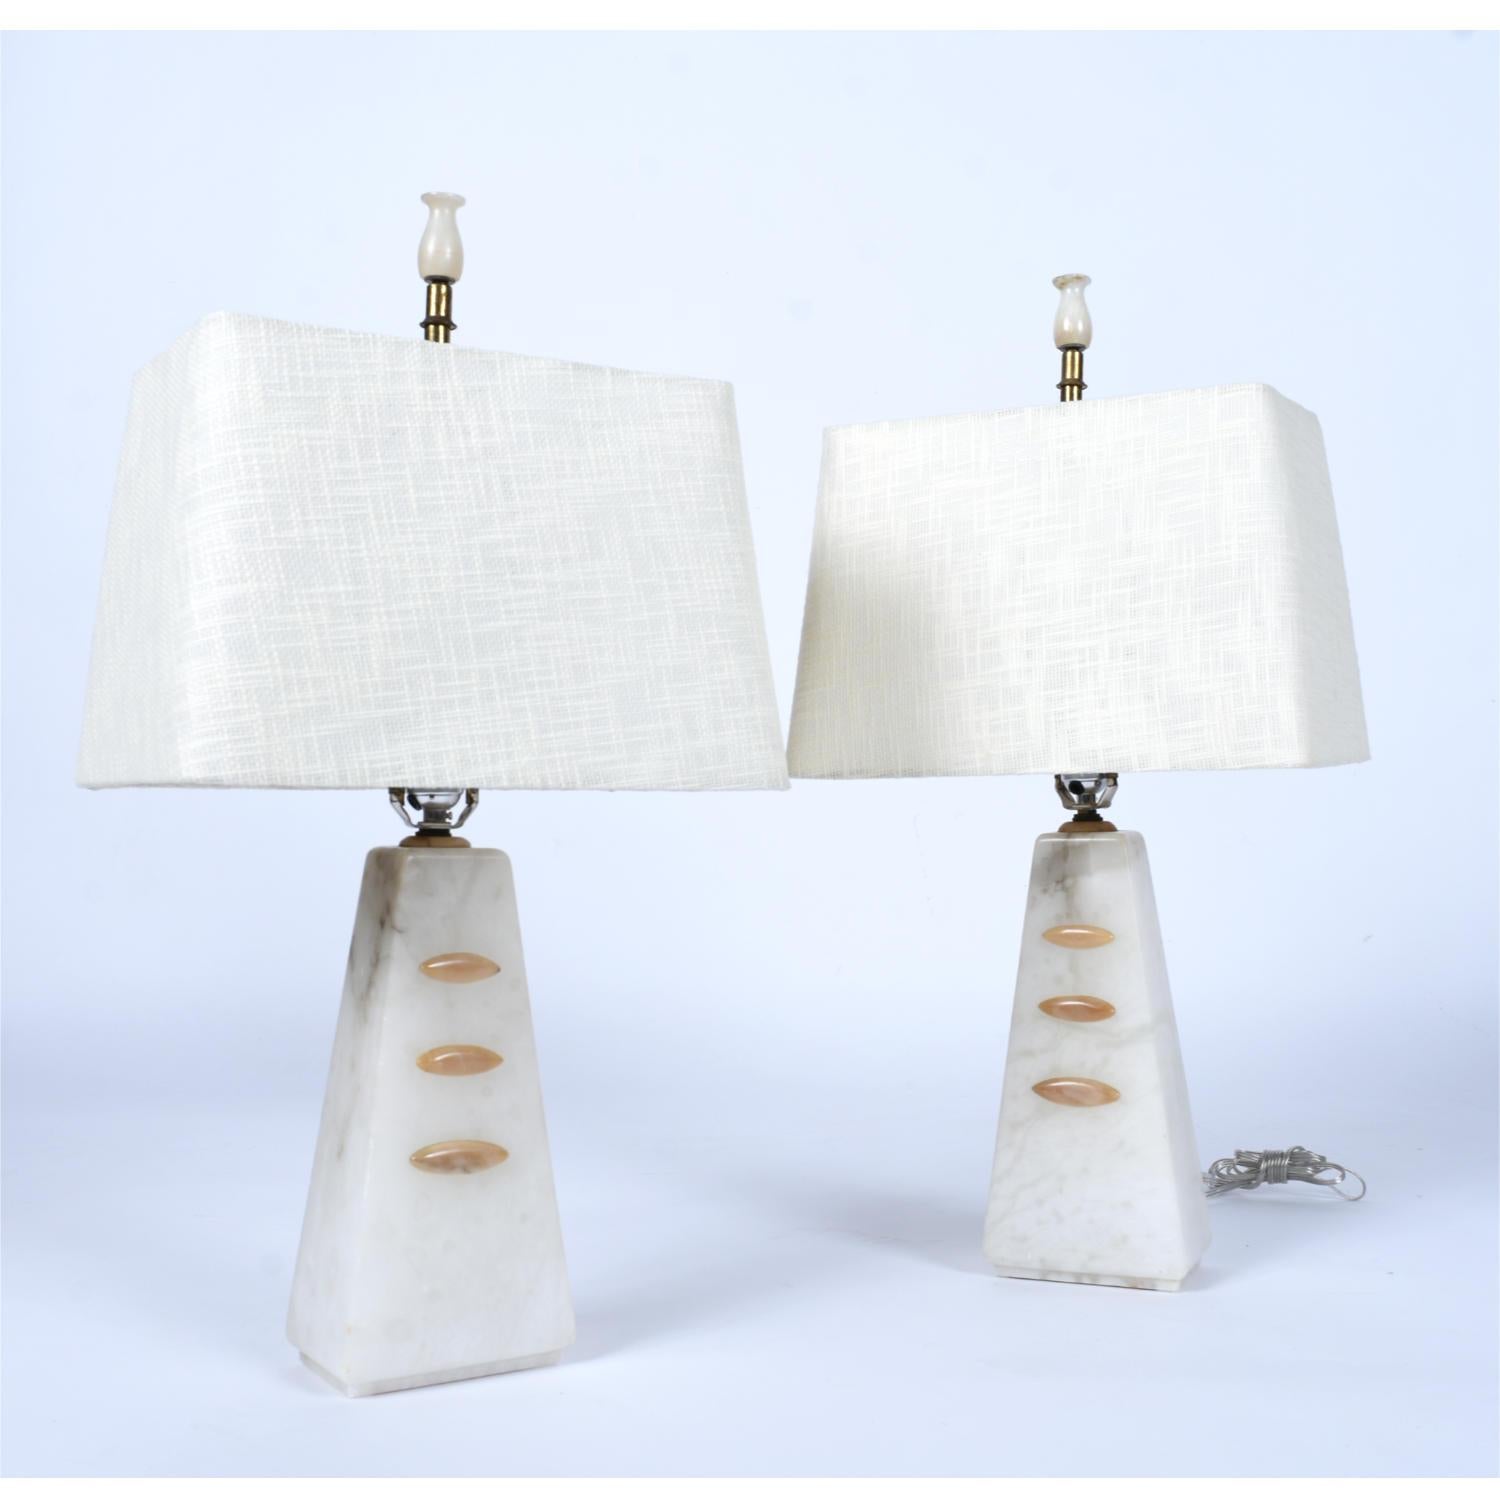 American Alabaster Pyramid Table Lamps and Finials, Art Deco to Modern Transitional Style For Sale